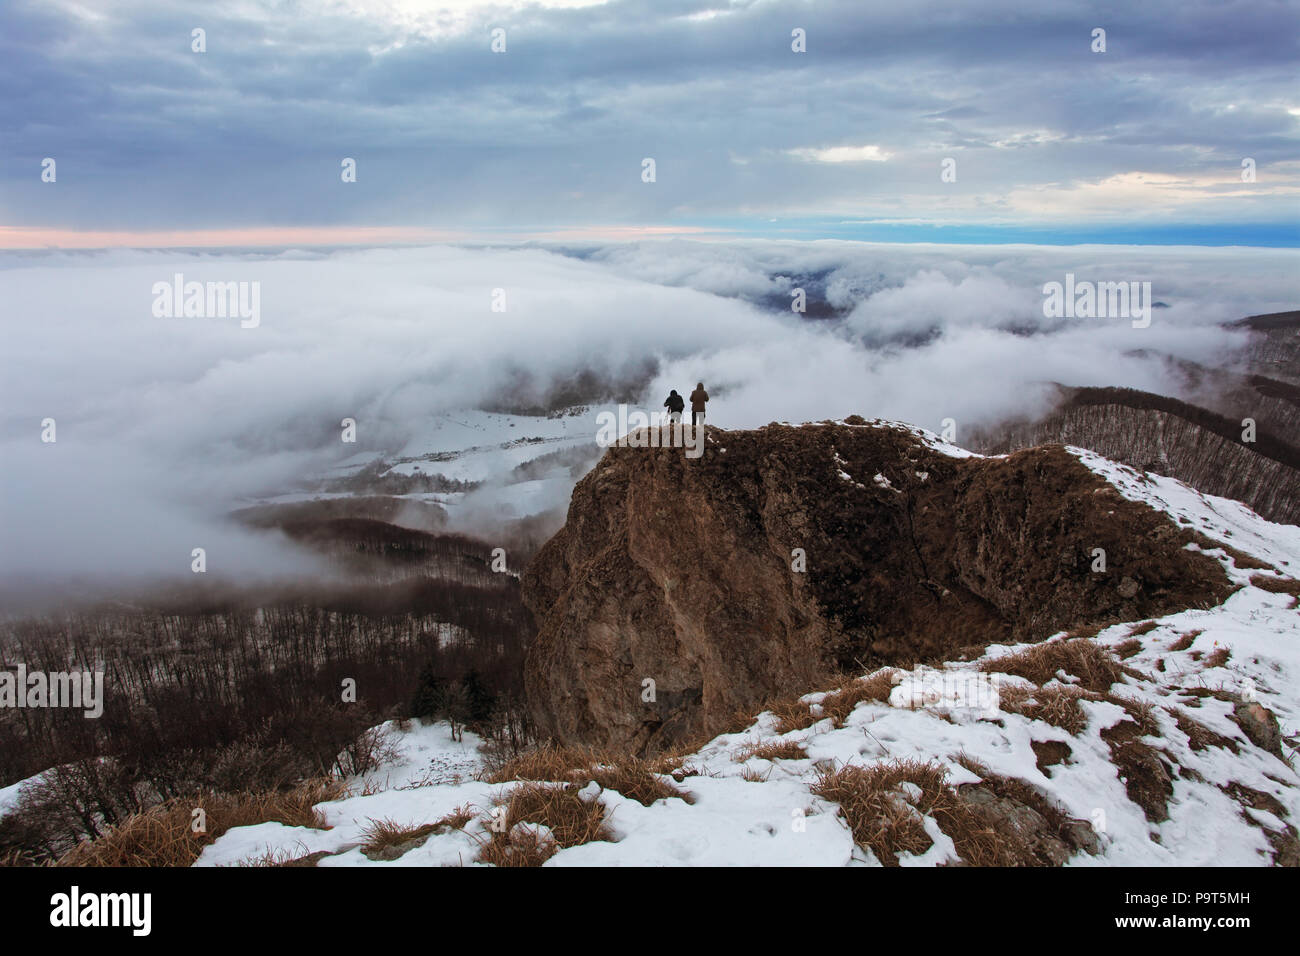 Cloudy mountain at winter with man Stock Photo